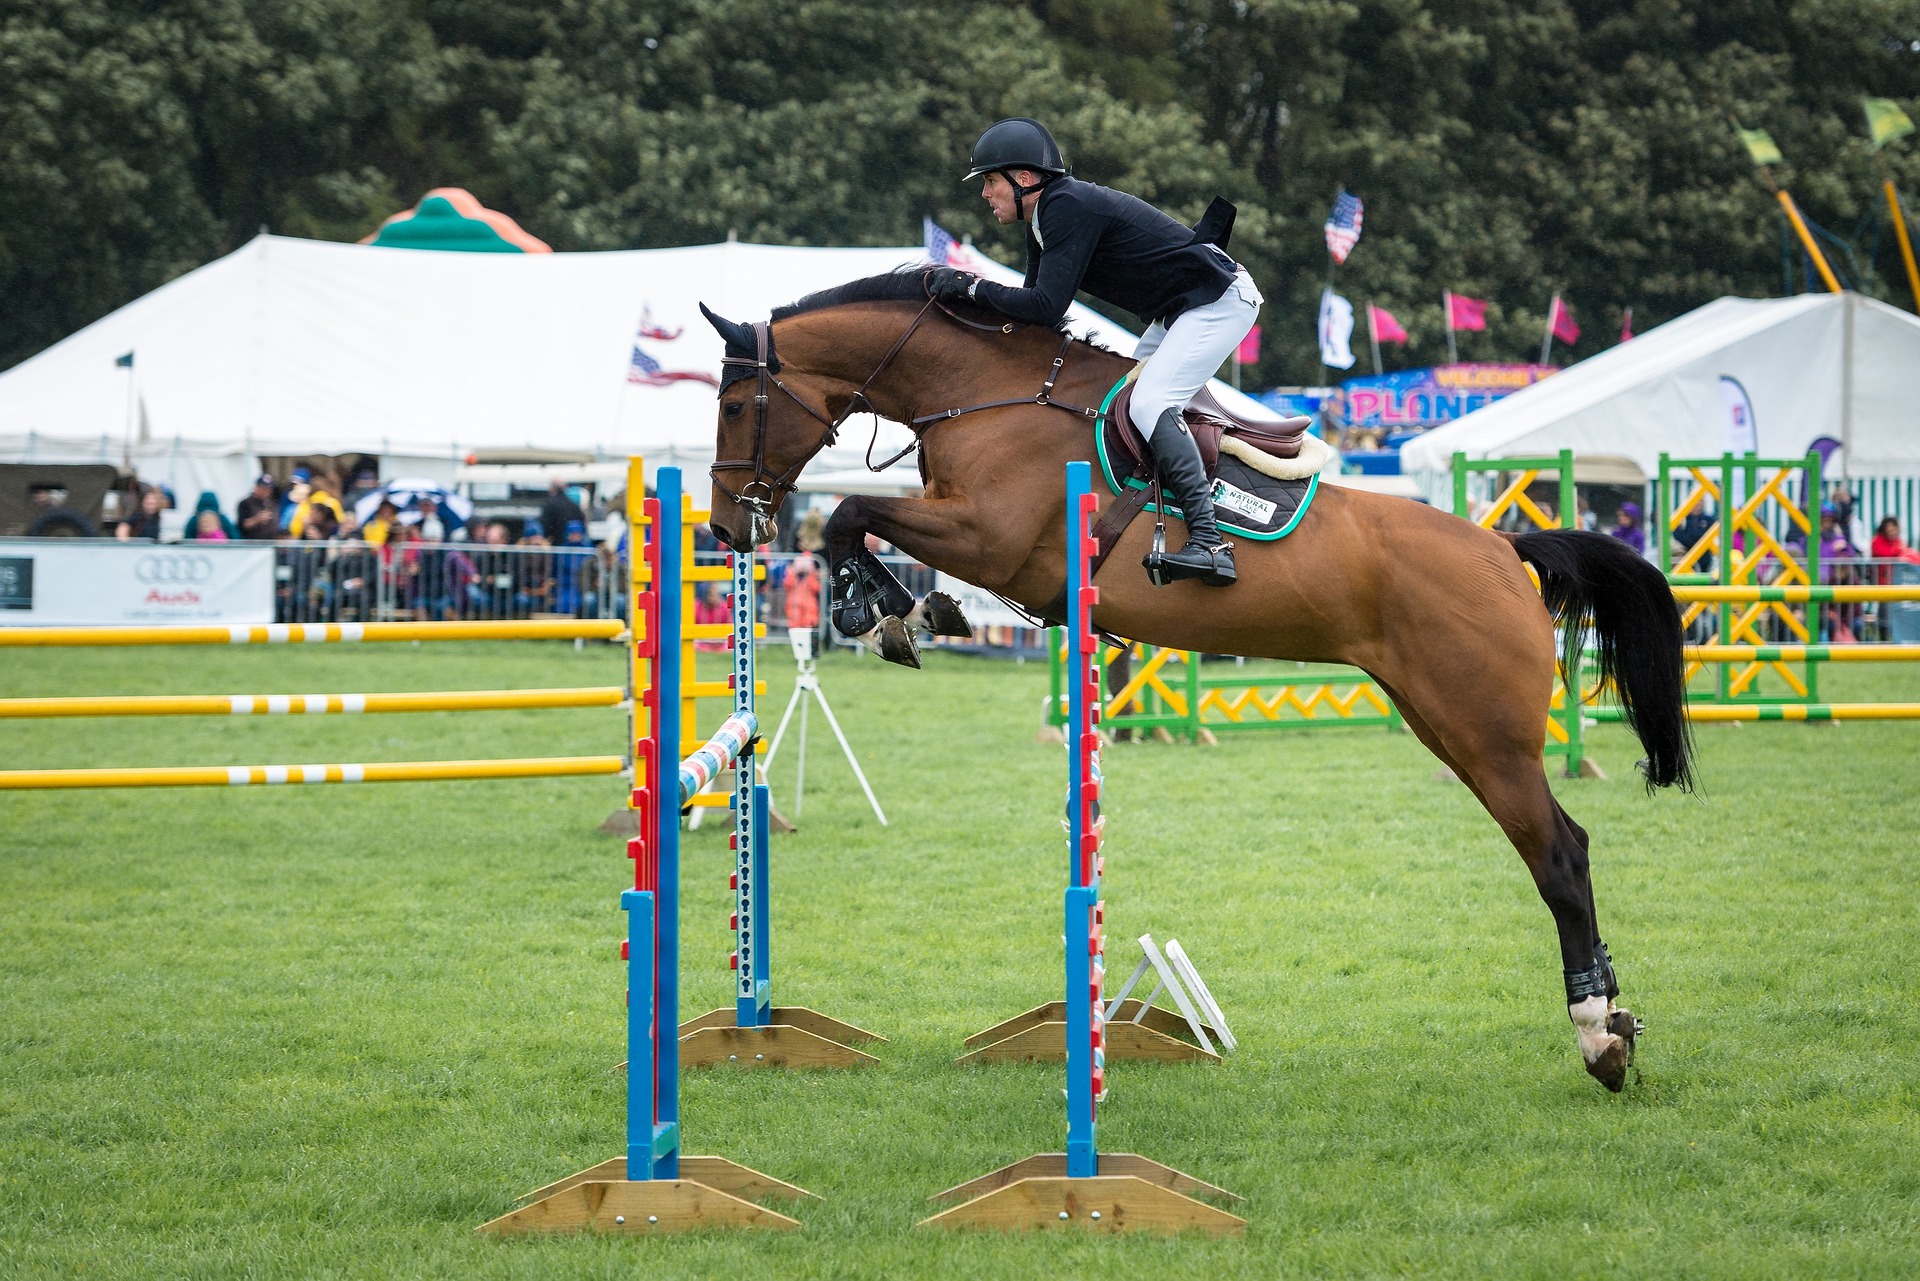 a person riding a horse jumping over obstacles